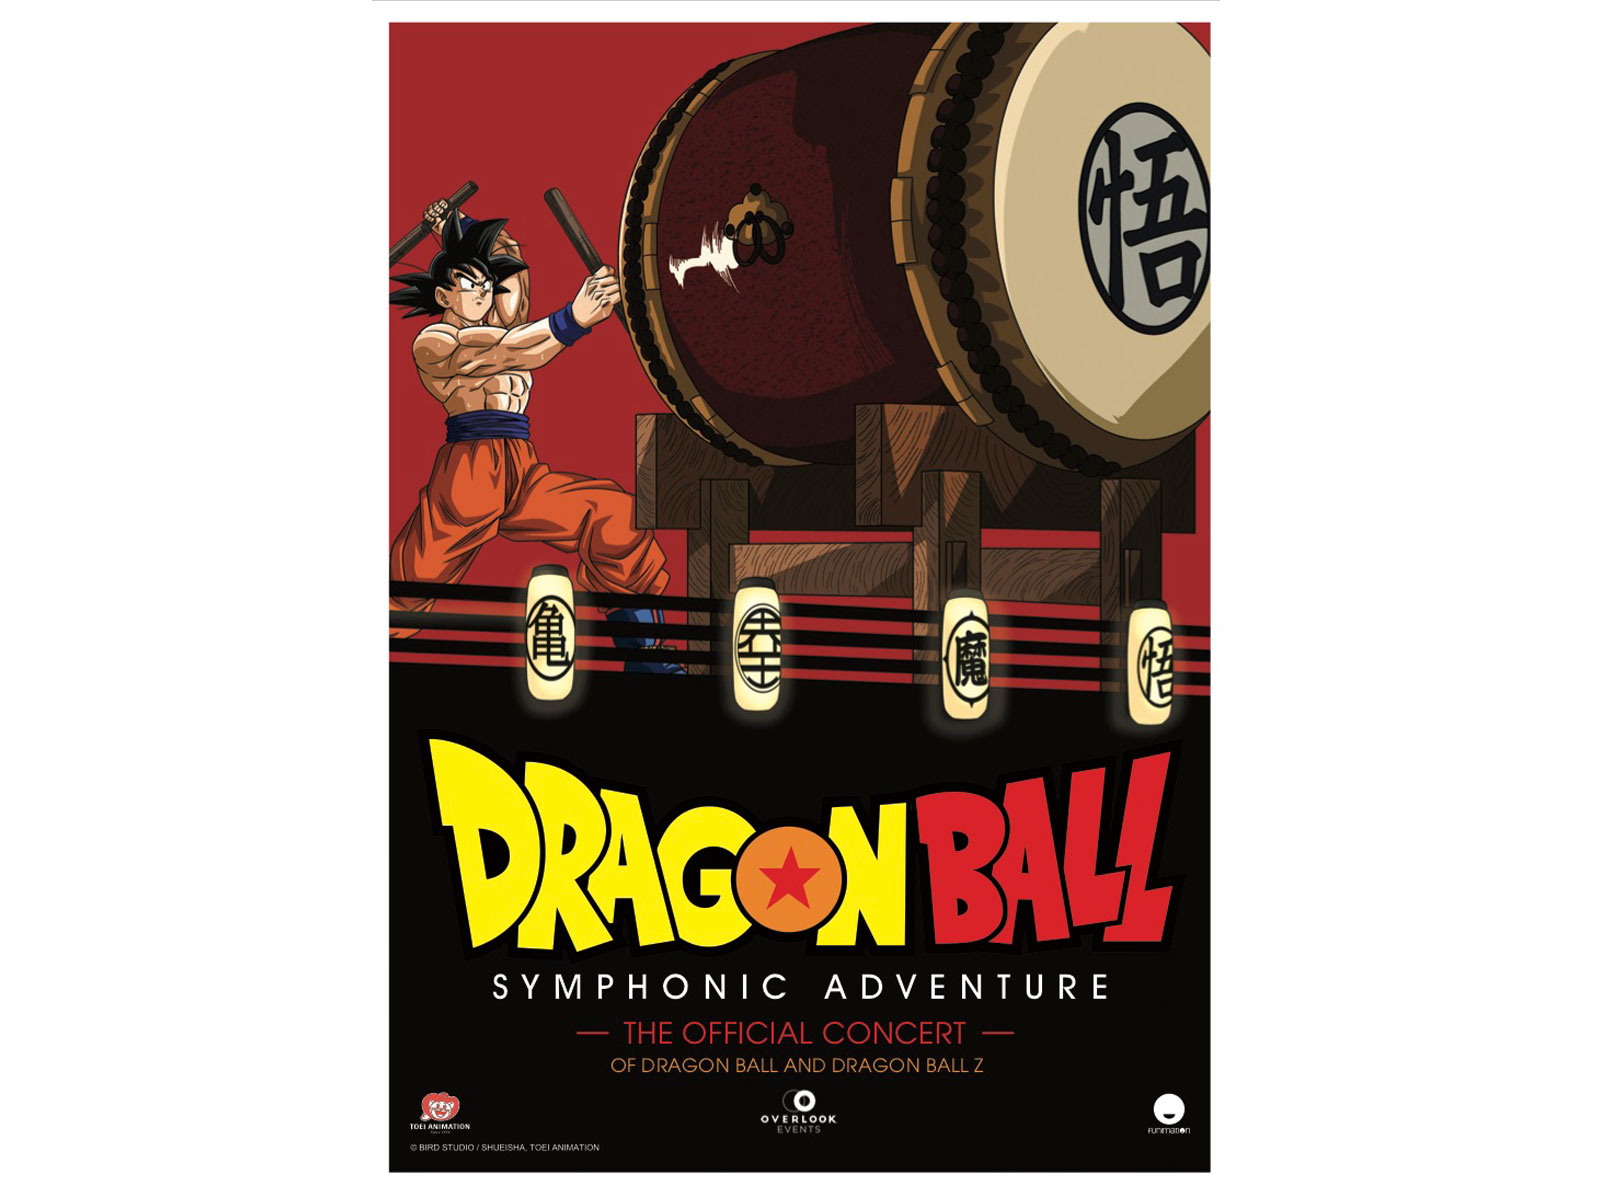 THE DRAGON BALL SYMPHONIC ADVENTURE COMES TO THE UNITED STATES IN 2020 WITH A PREMIERE PERFORMANCE IN CHICAGO!